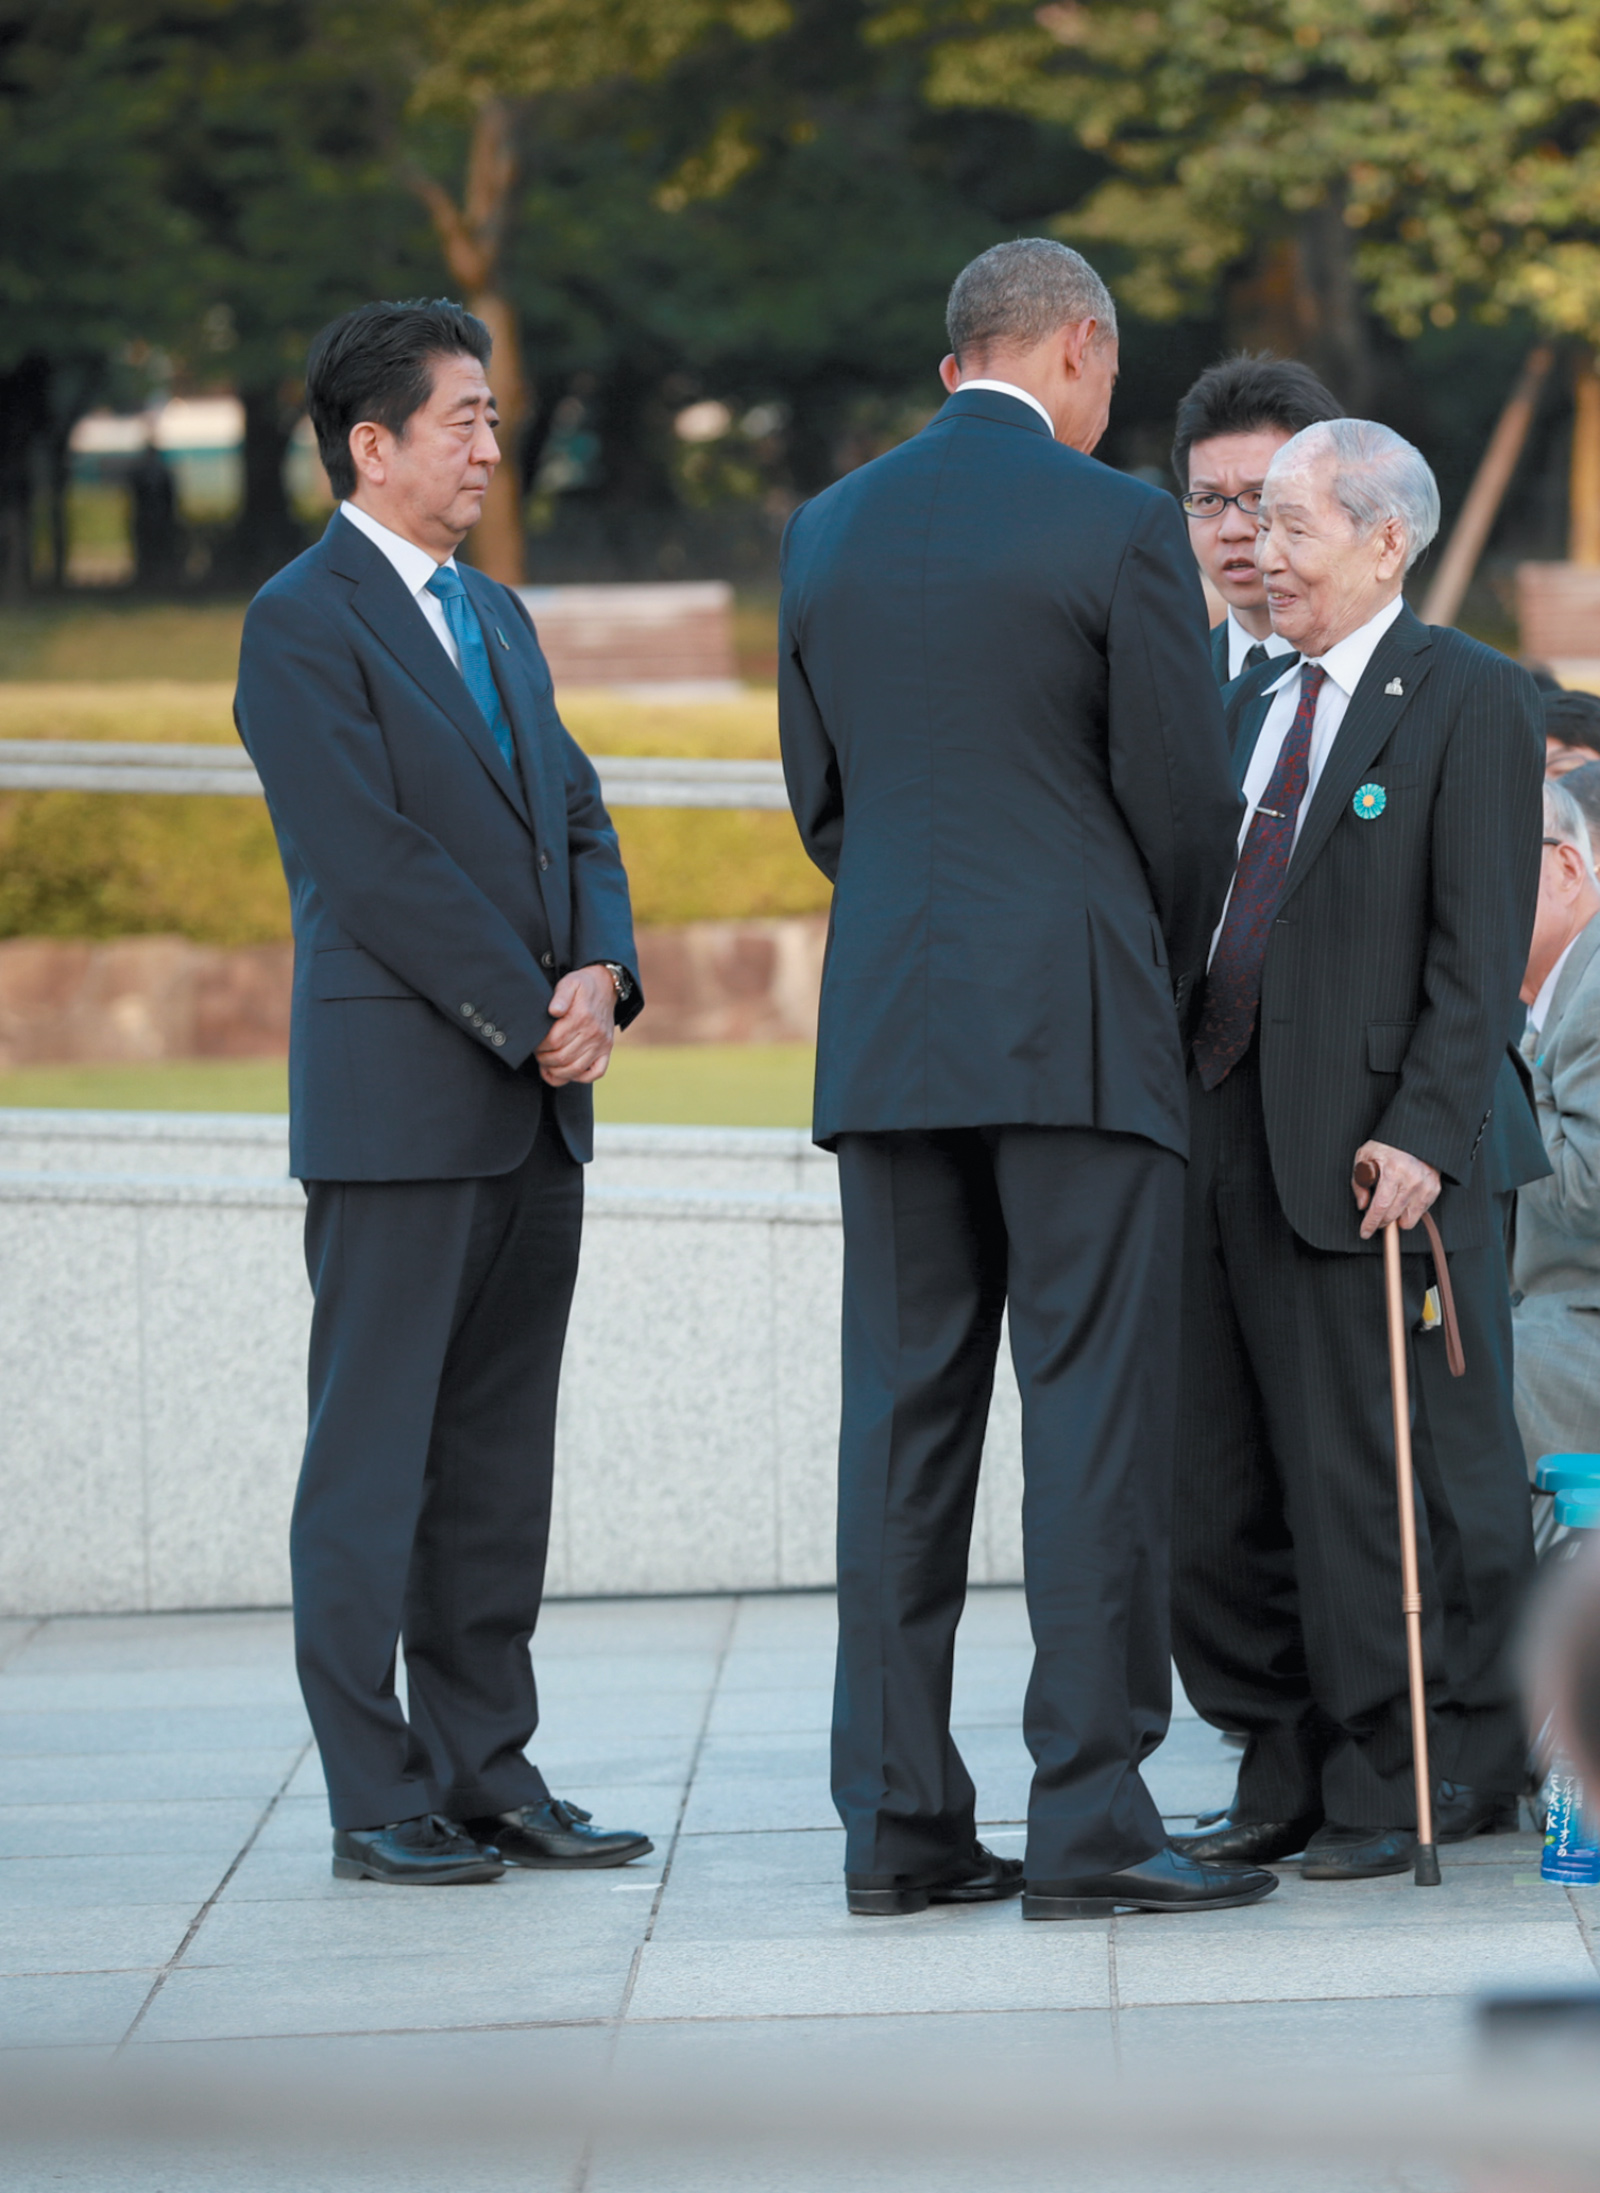 President Obama with Sunao Tsuboi, a survivor of the US’s atomic bombing of Hiroshima in 1945, during a ceremony at the Hiroshima Peace Memorial, May 2016. Japanese Prime Minister Shinzo Abe is at left.